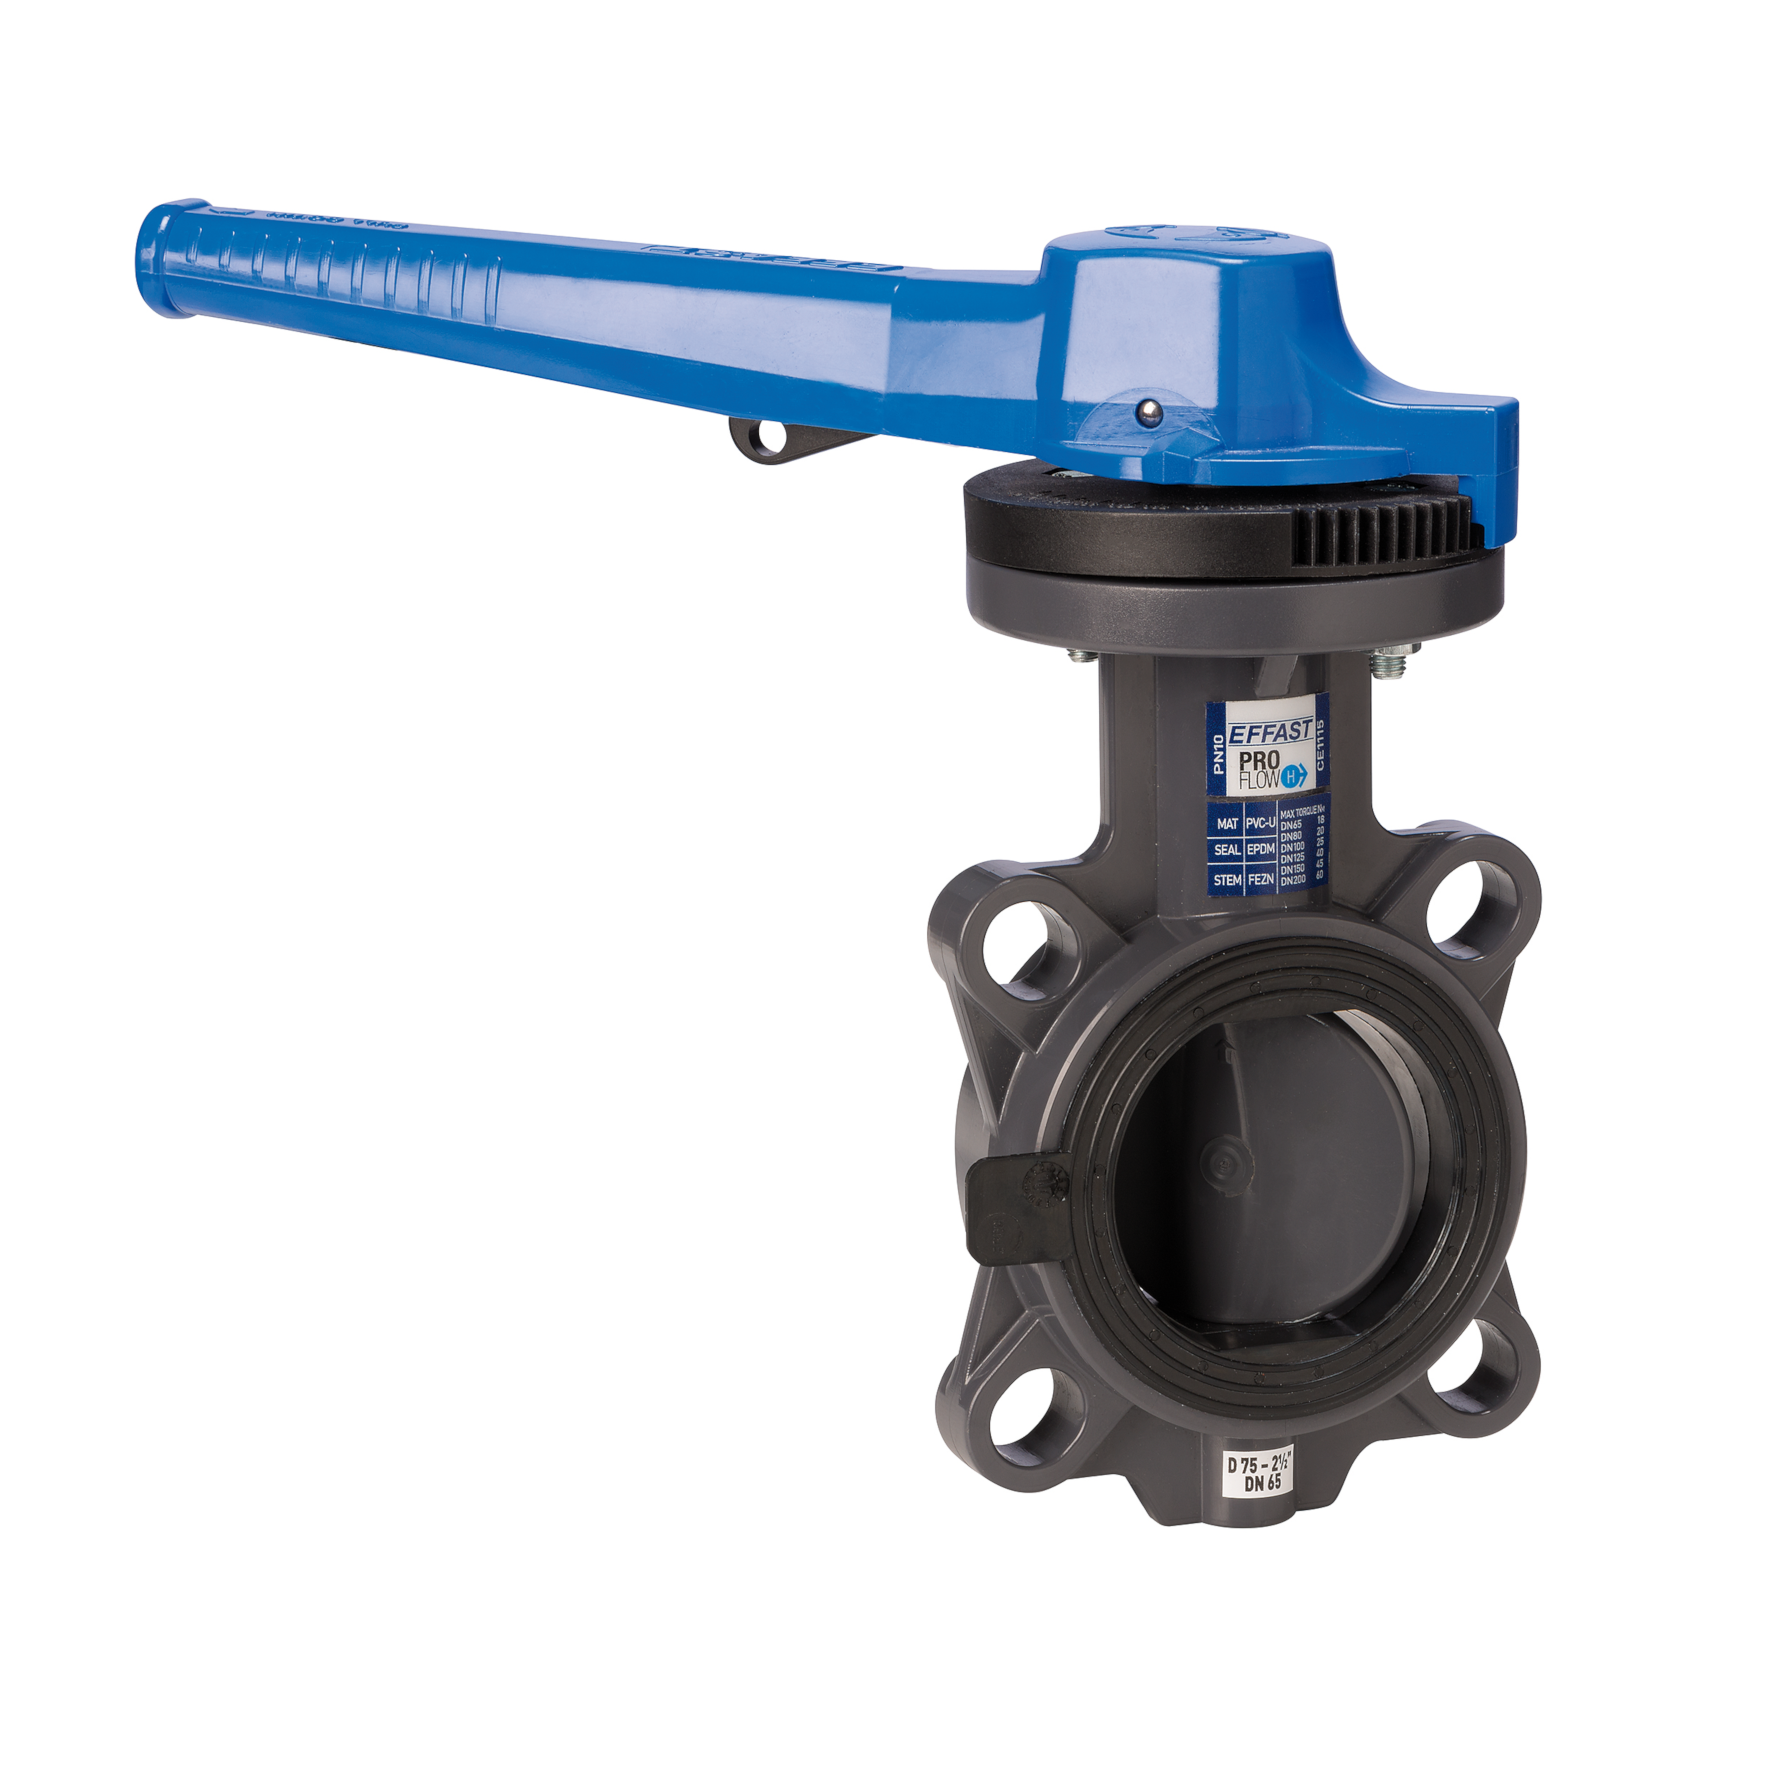 PVC-U PROFLOW® H butterfly valve - EFFAST - 100% Made in Italy